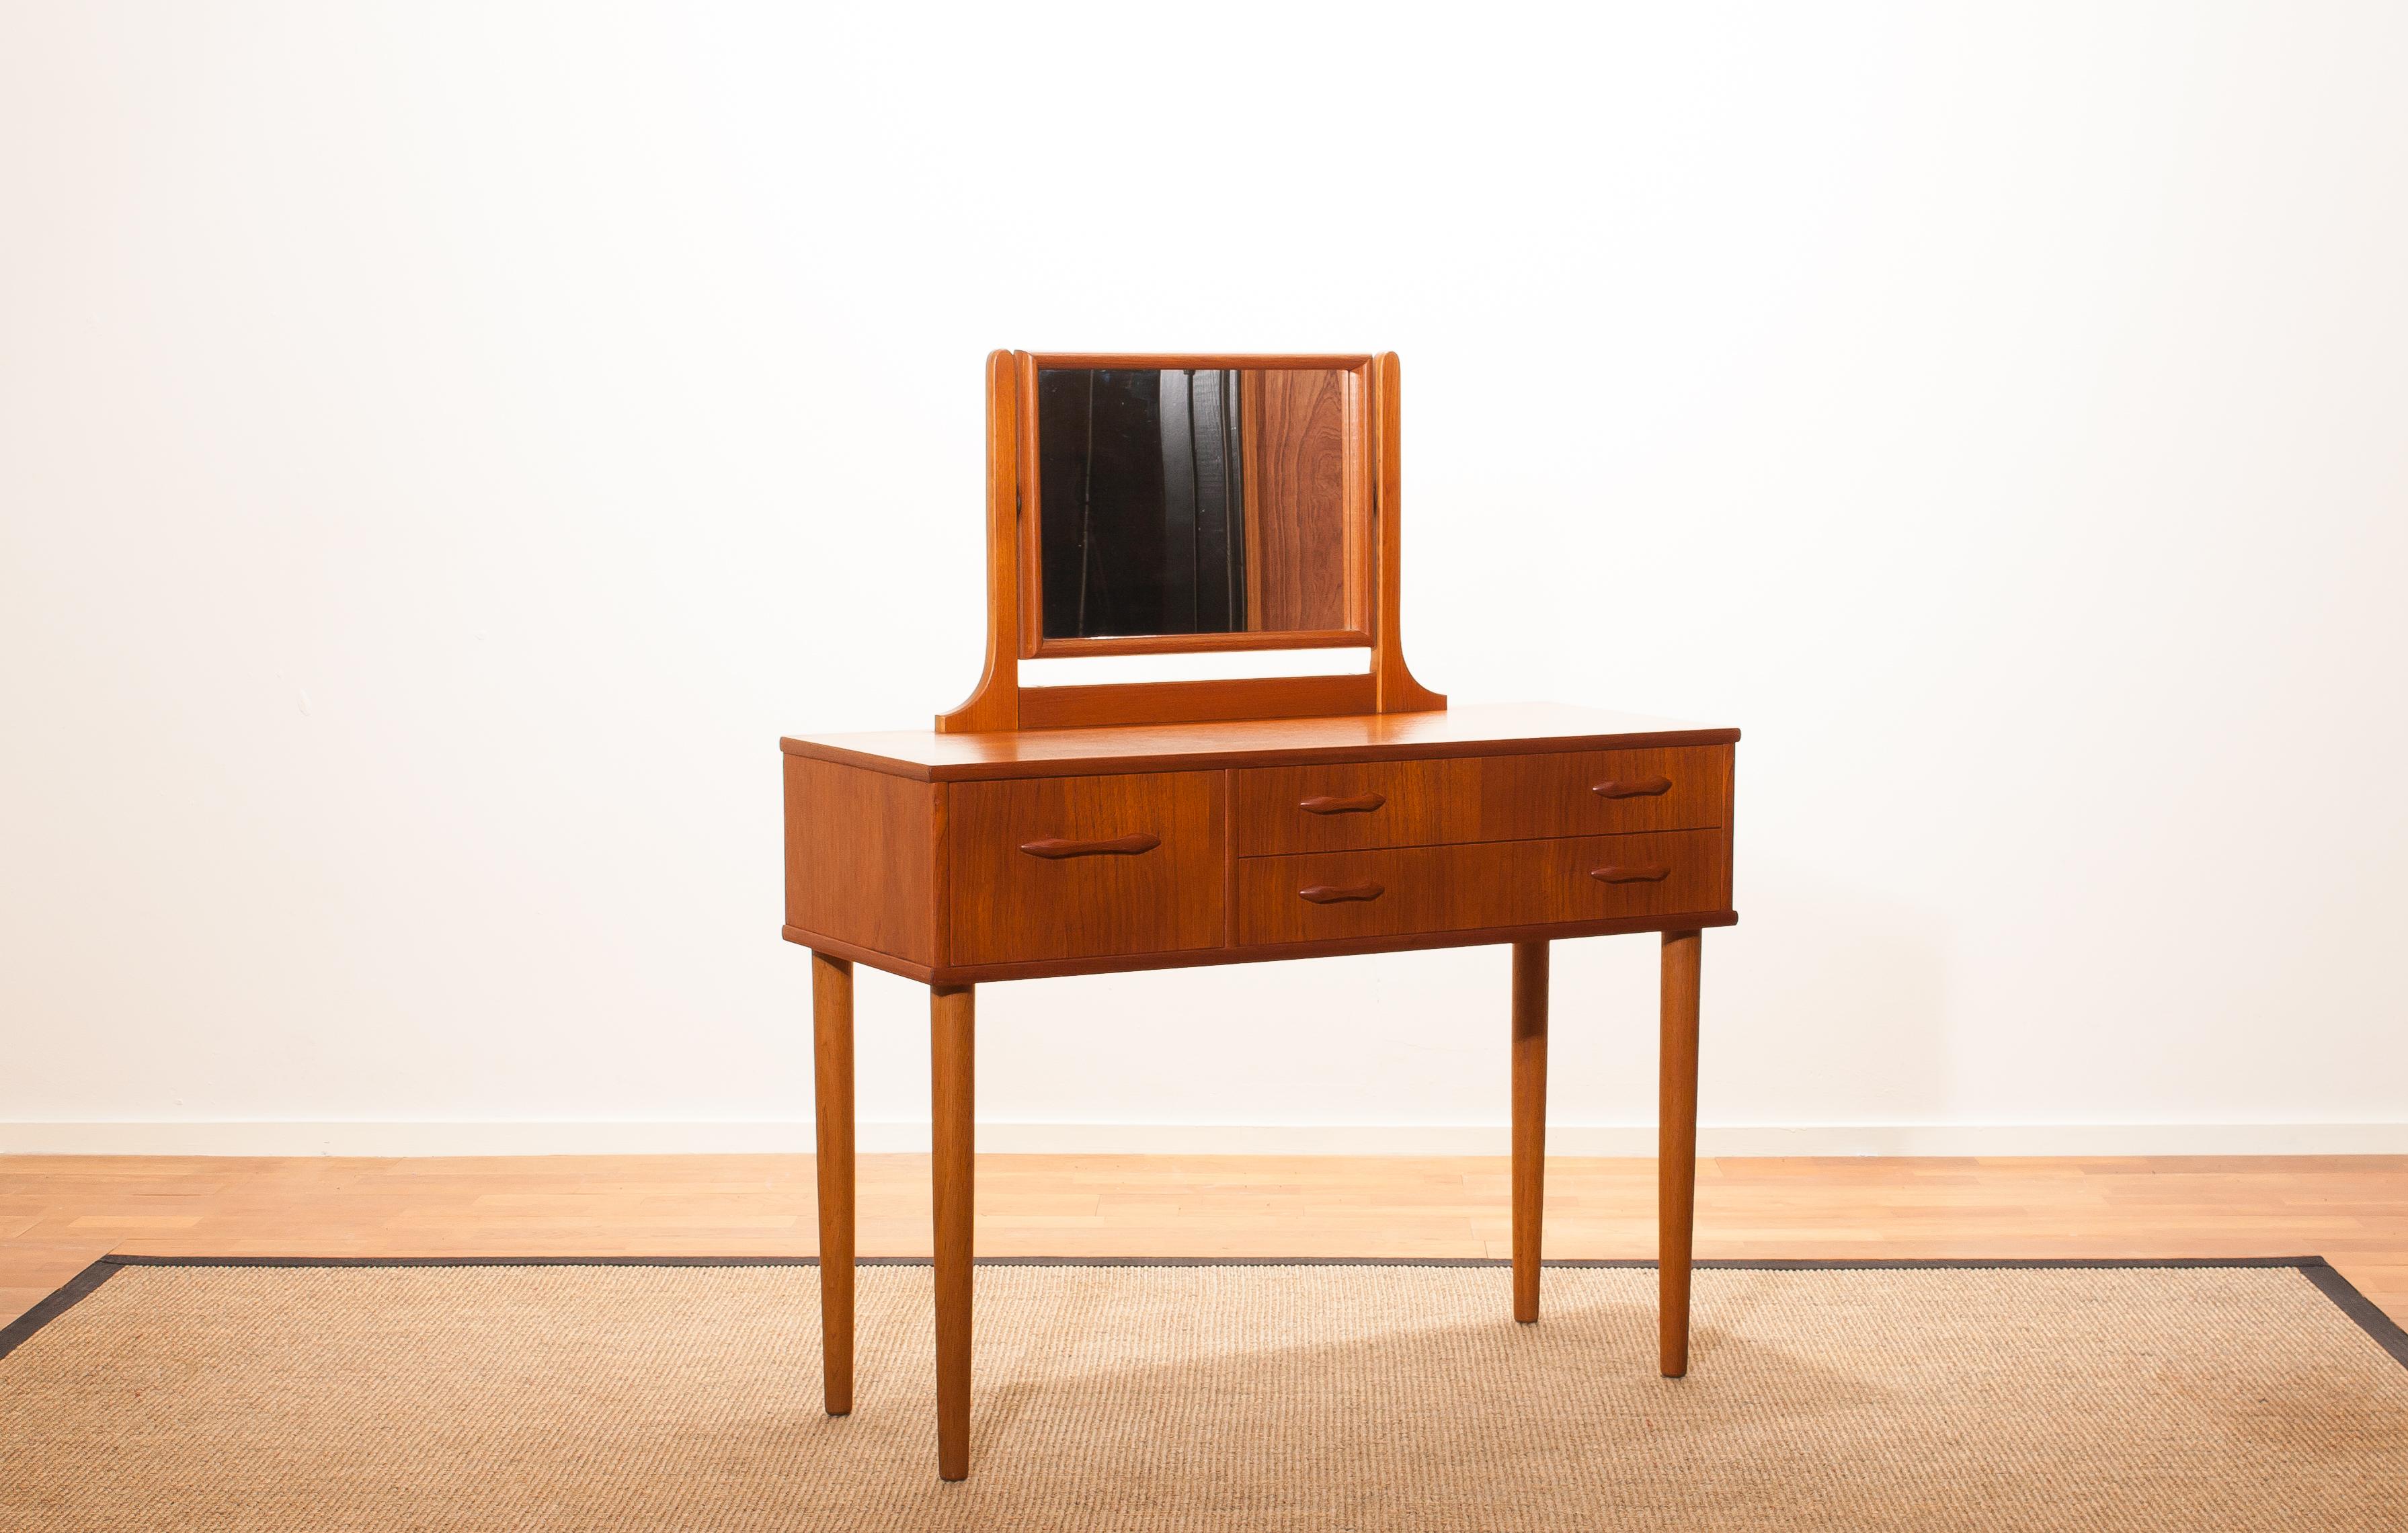 Beautiful dressing table by Ulferts Sweden.
This dressing table is made of teak and consists of three drawers and a mirror.
It is in wonderful condition.
Period 1950s.
Dimensions: H 111 cm (including mirror, the height of the tabletop 72 cm)
W